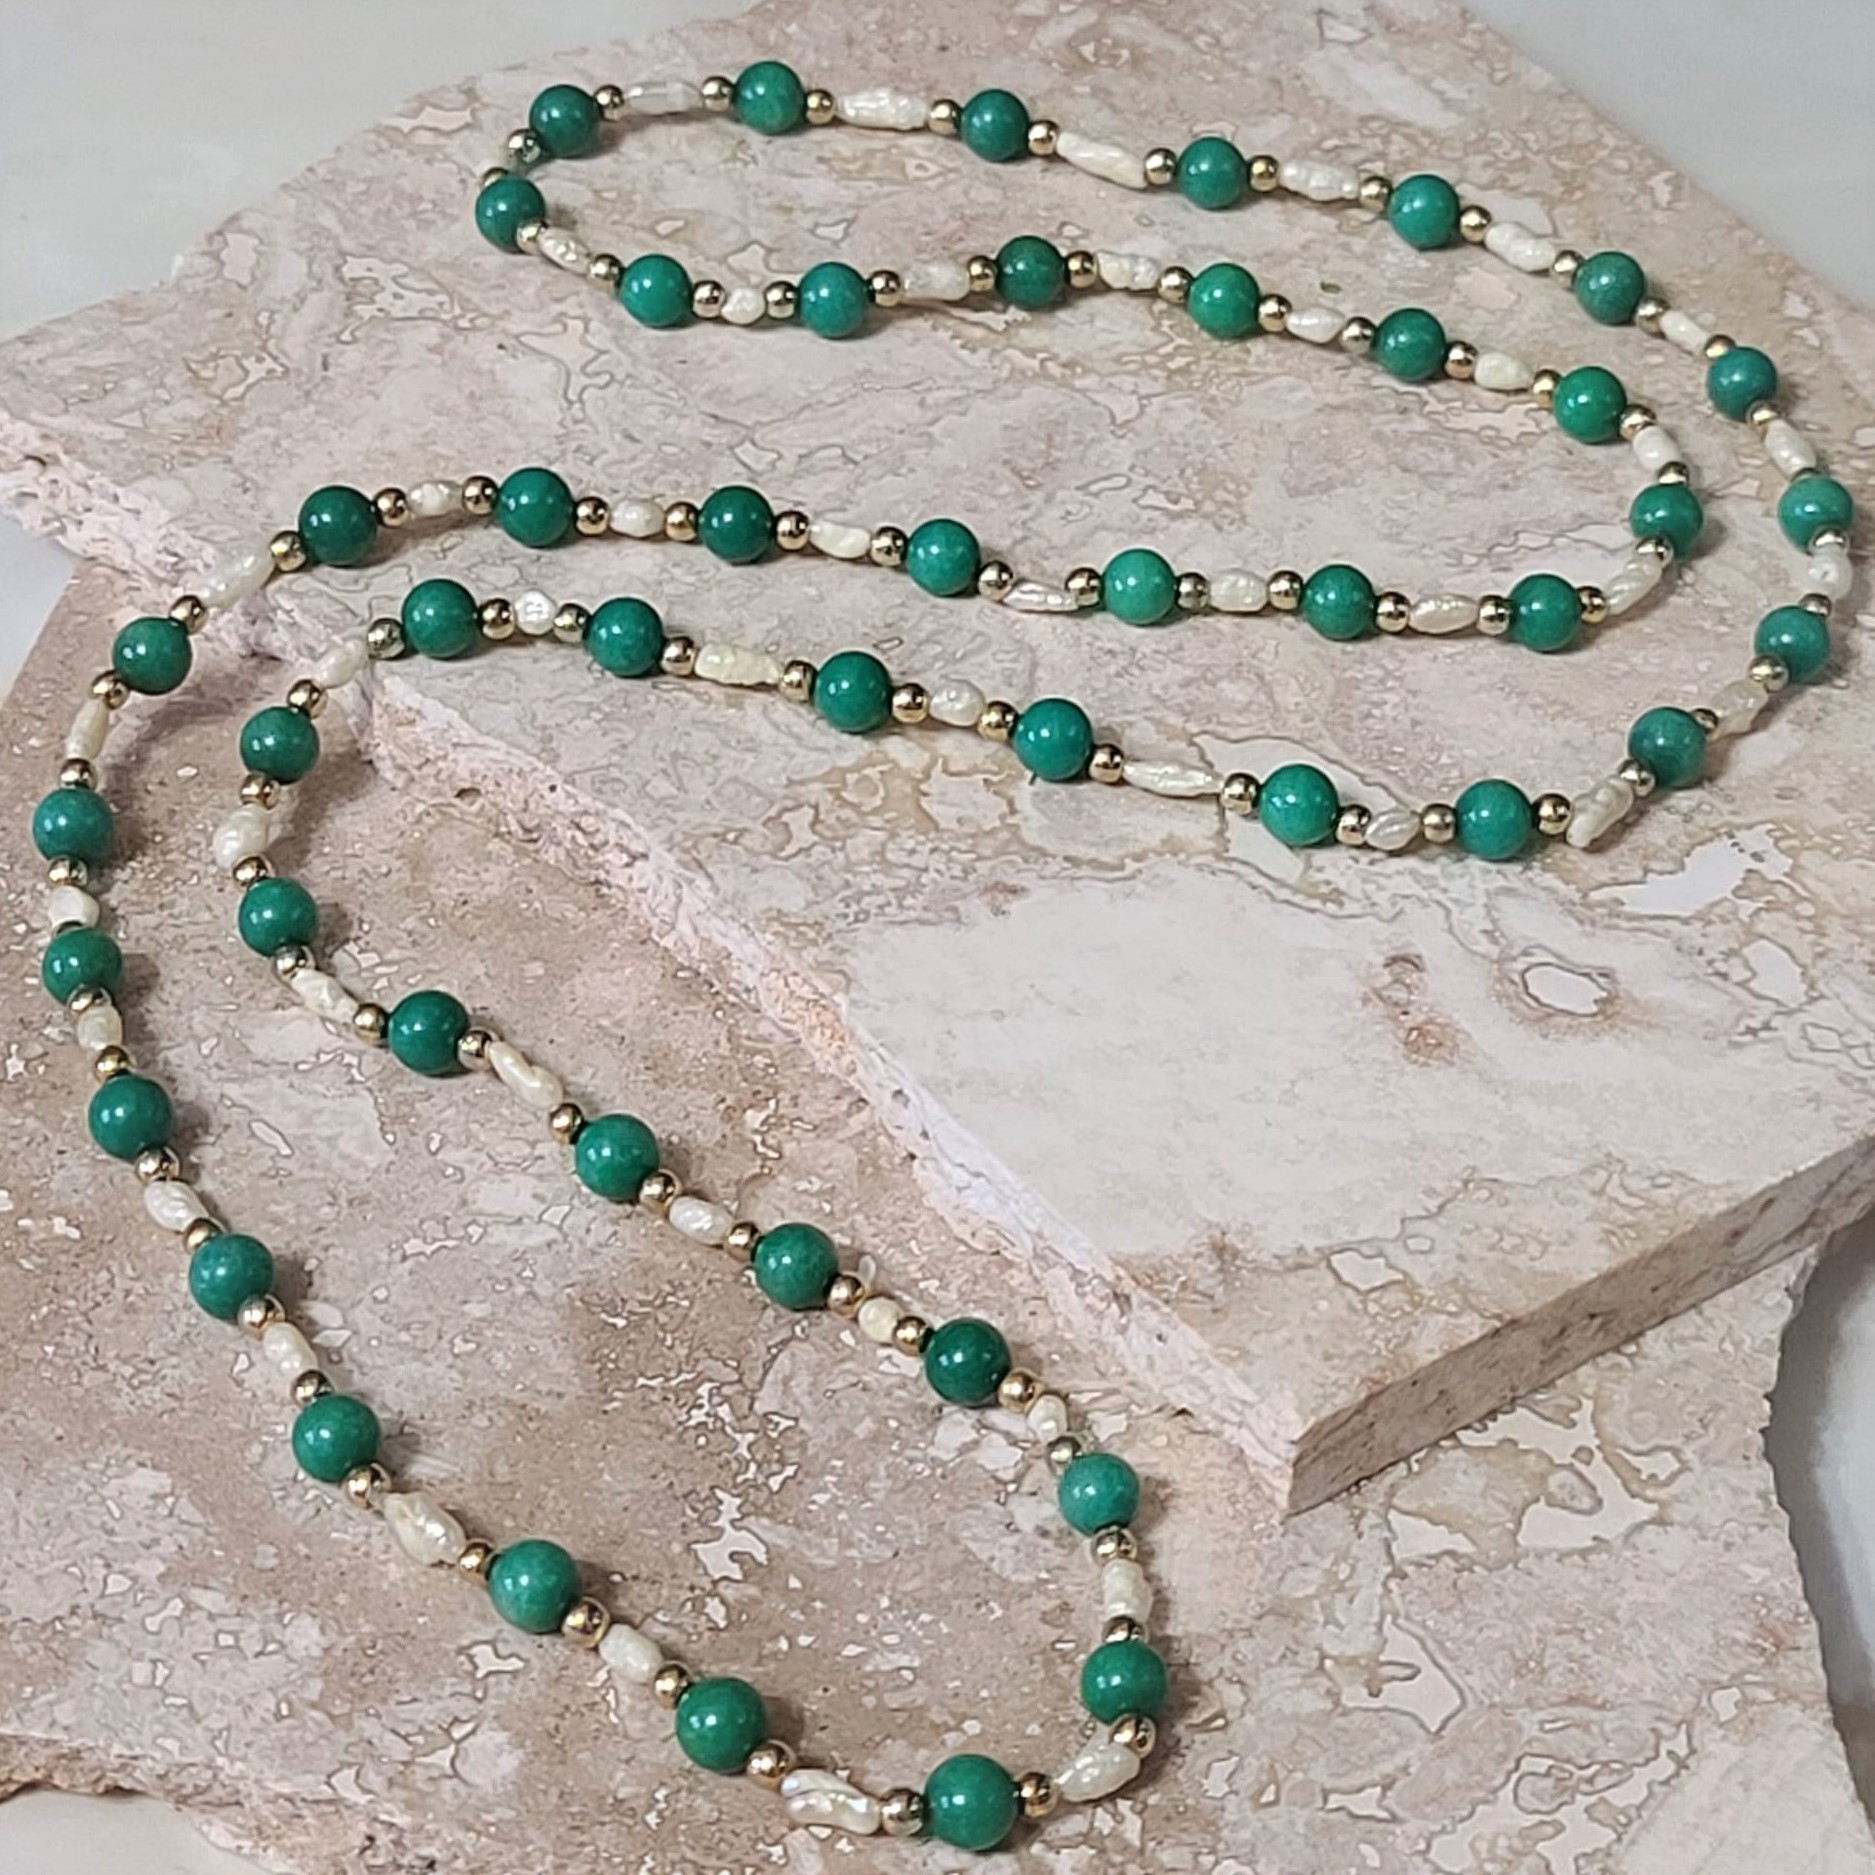 Cultured Pearls & Green Glass Beads Necklace 32"